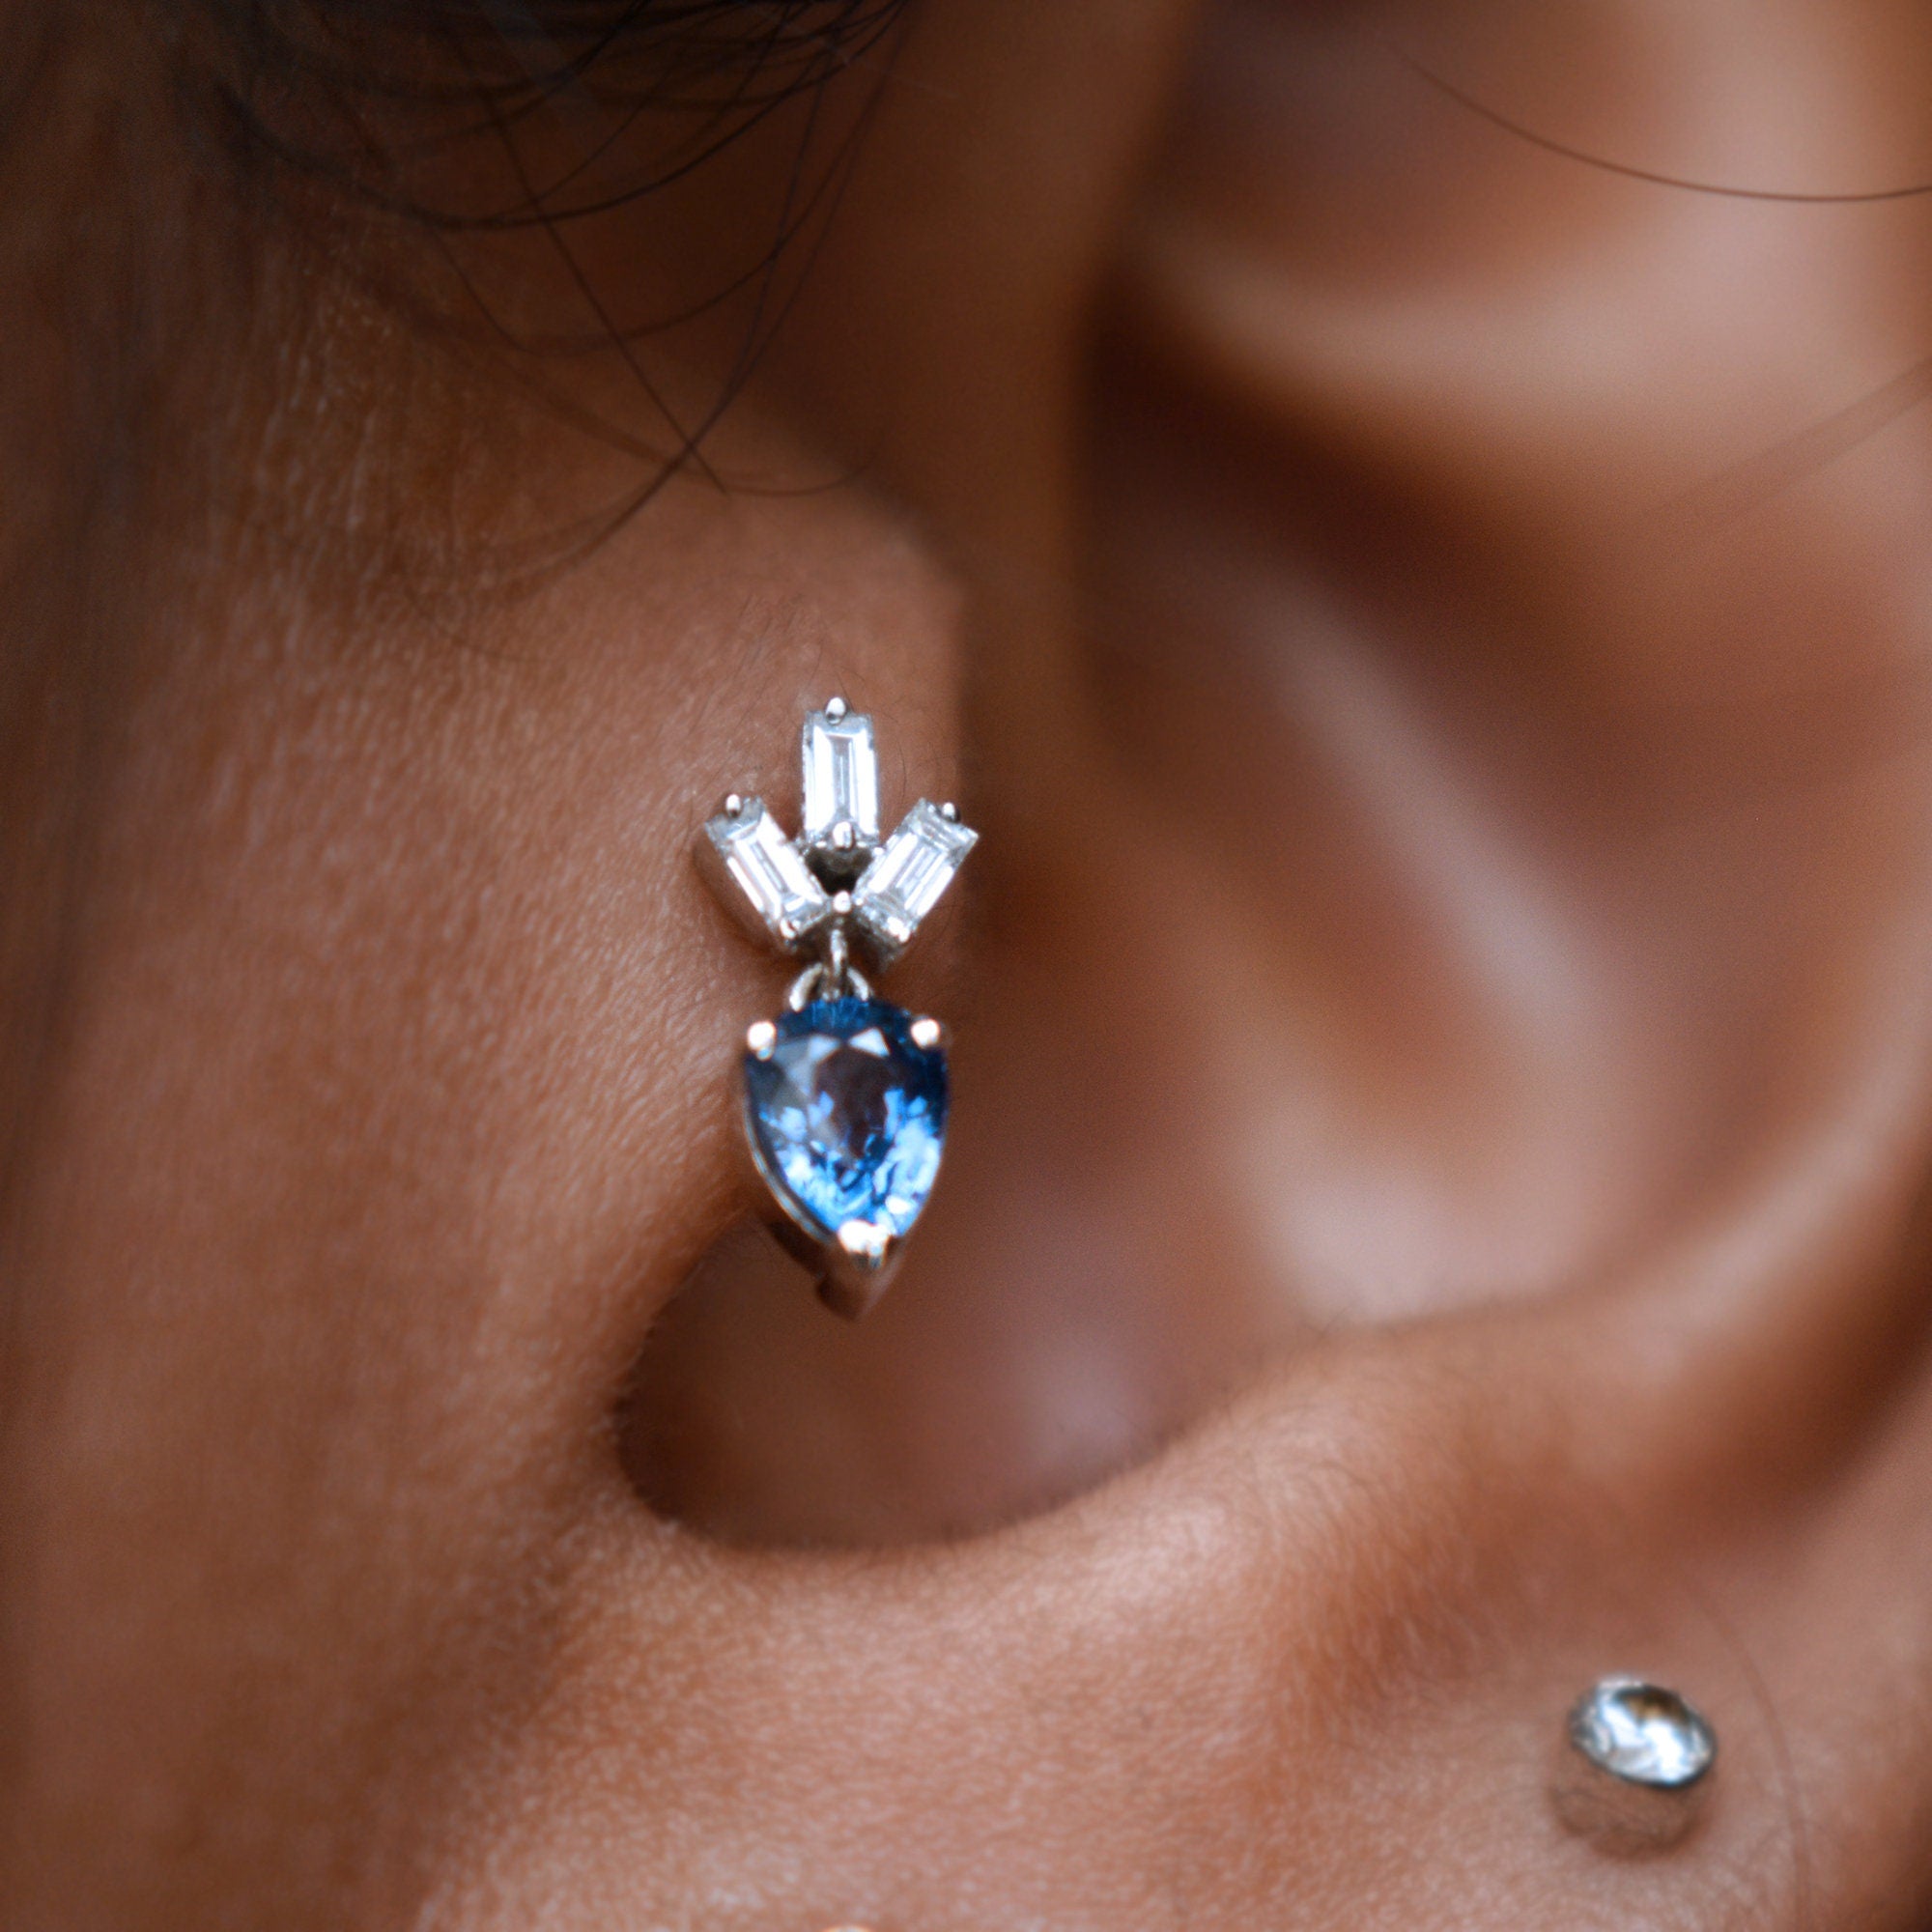 Natural Diamonds & Blue Sapphire Cluster Dangle Tiny Earring, 14k 18k Solid Gold Piercing Jewelry, Unique Ear Setup Tragus Flat Helix 16g